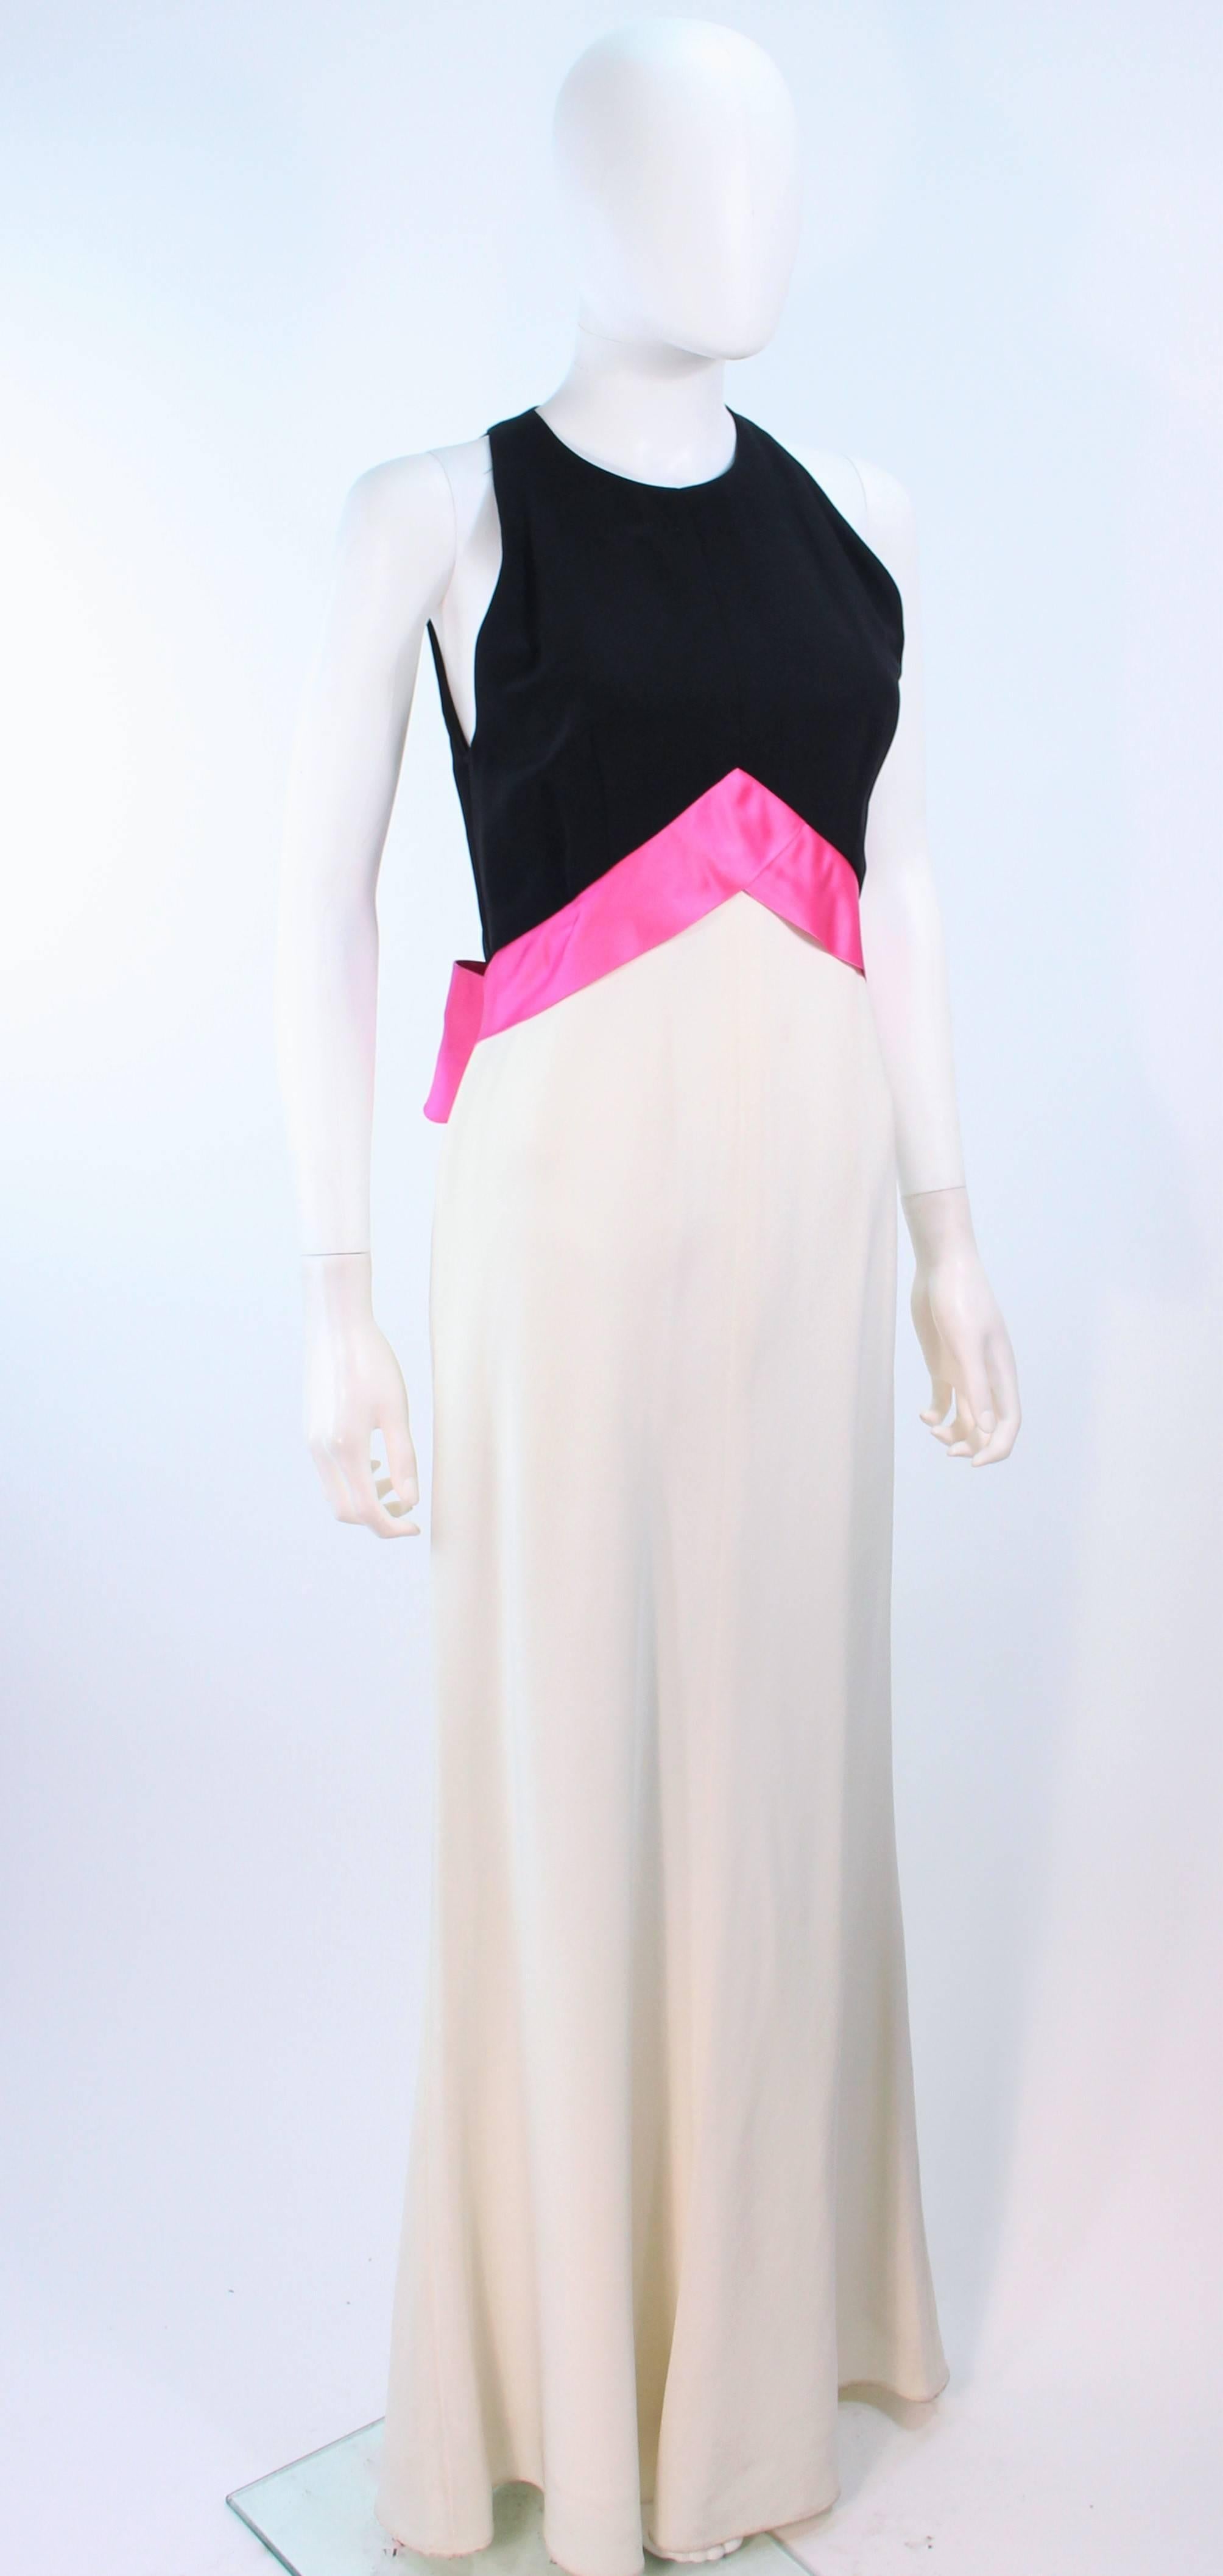 Gray ELIZABETH ARDEN Black Pink Cream Gown with Satin Bow Bias Skirt Size 8  For Sale